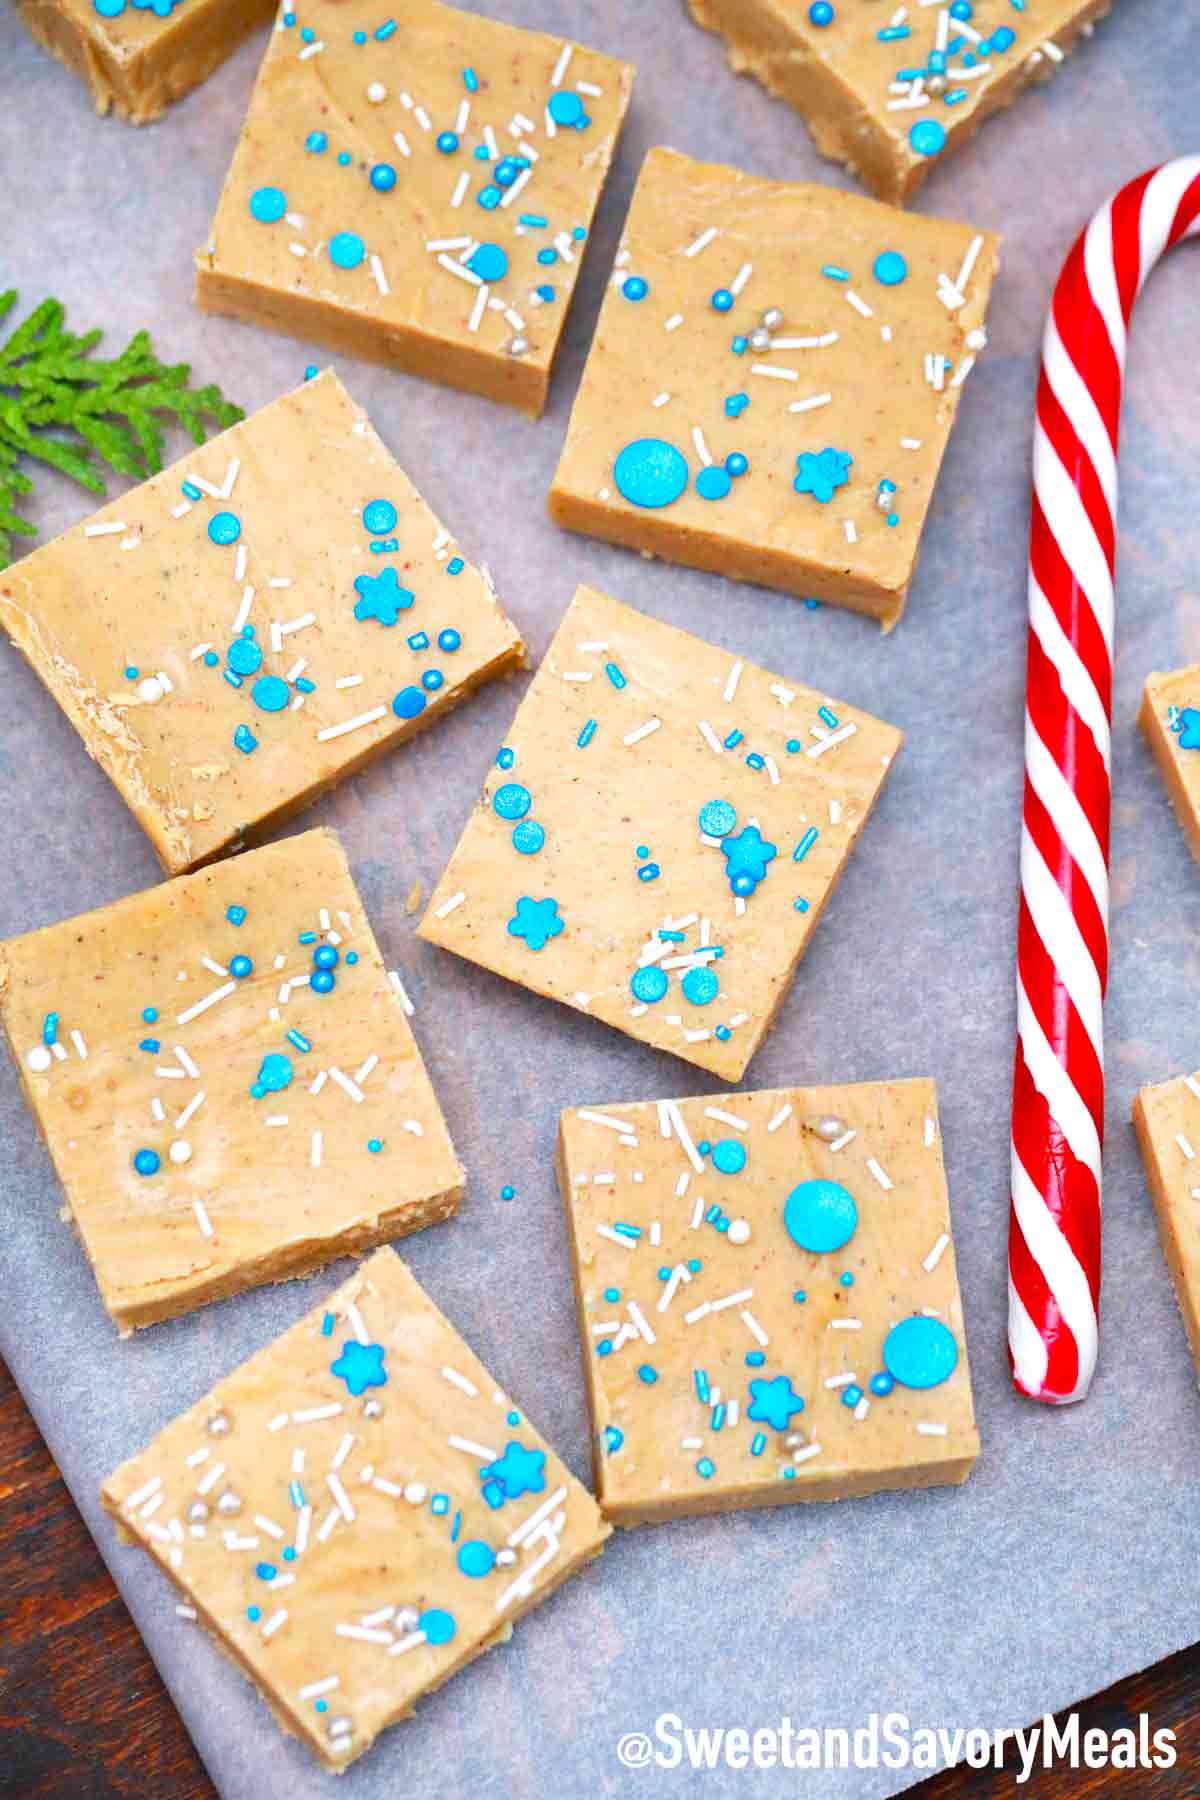 Gingerbread Fudge Recipe - A New Christmas Classic - Thrifty Jinxy